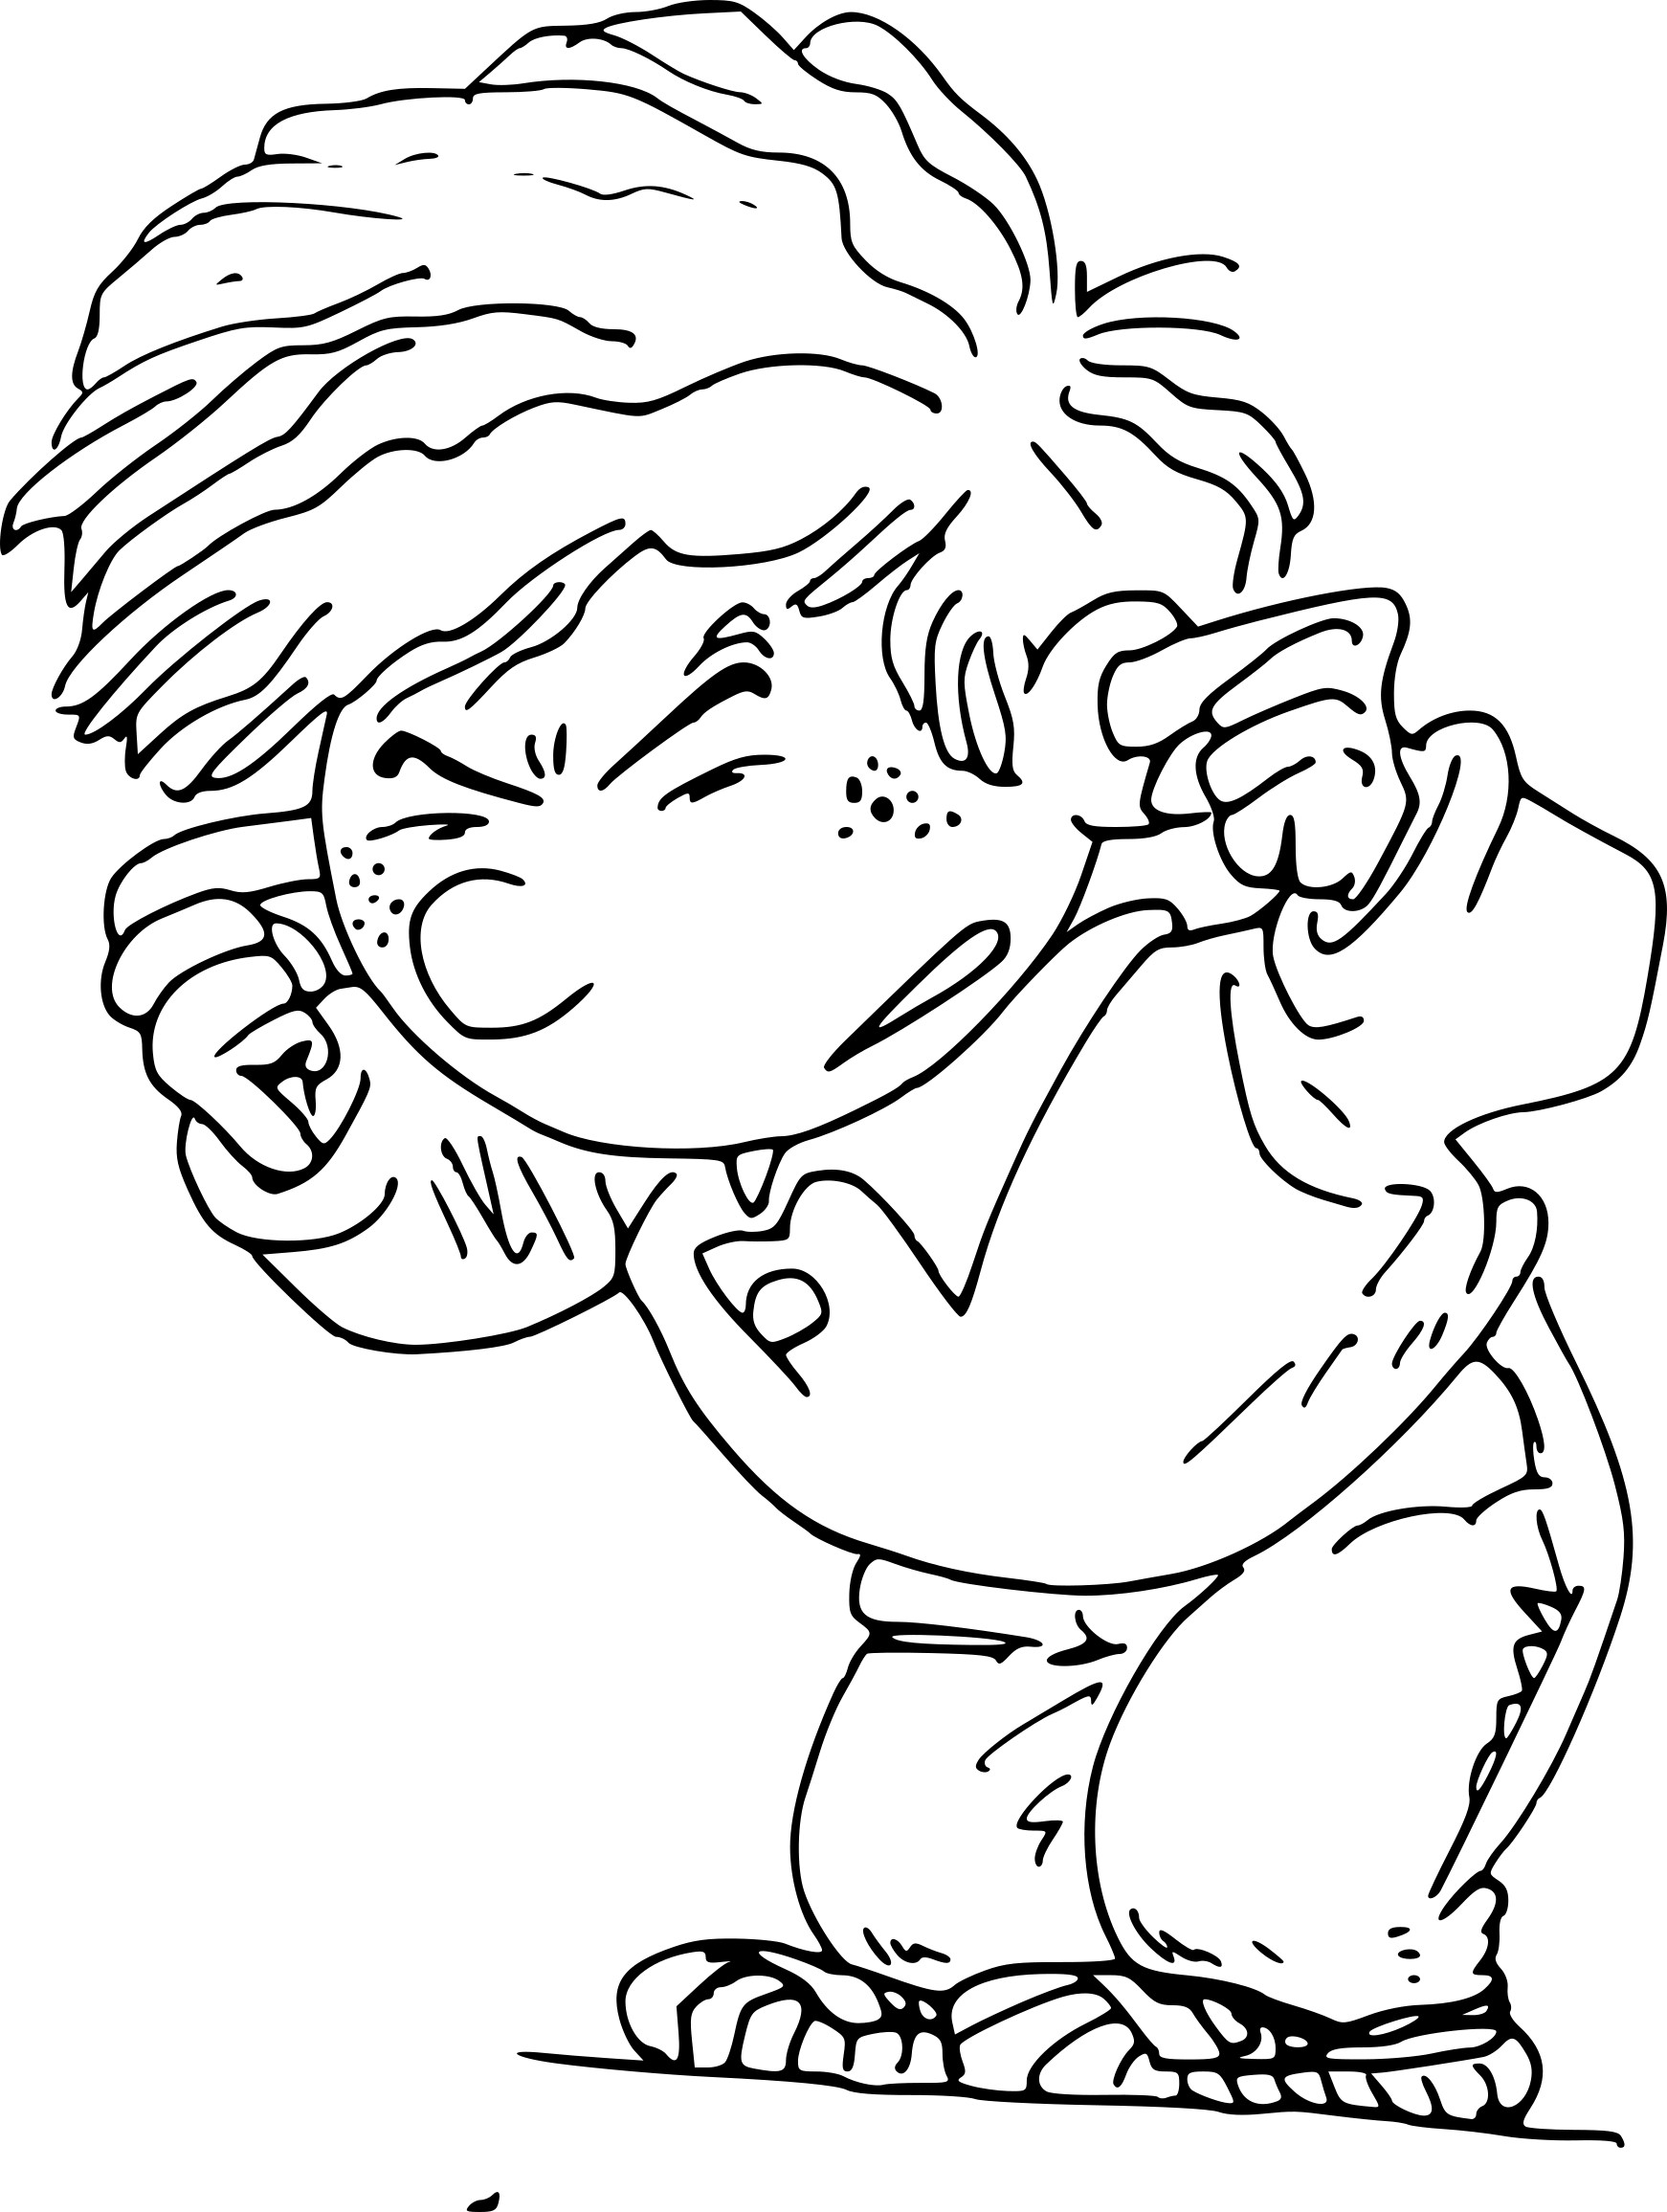 Cedric coloring page